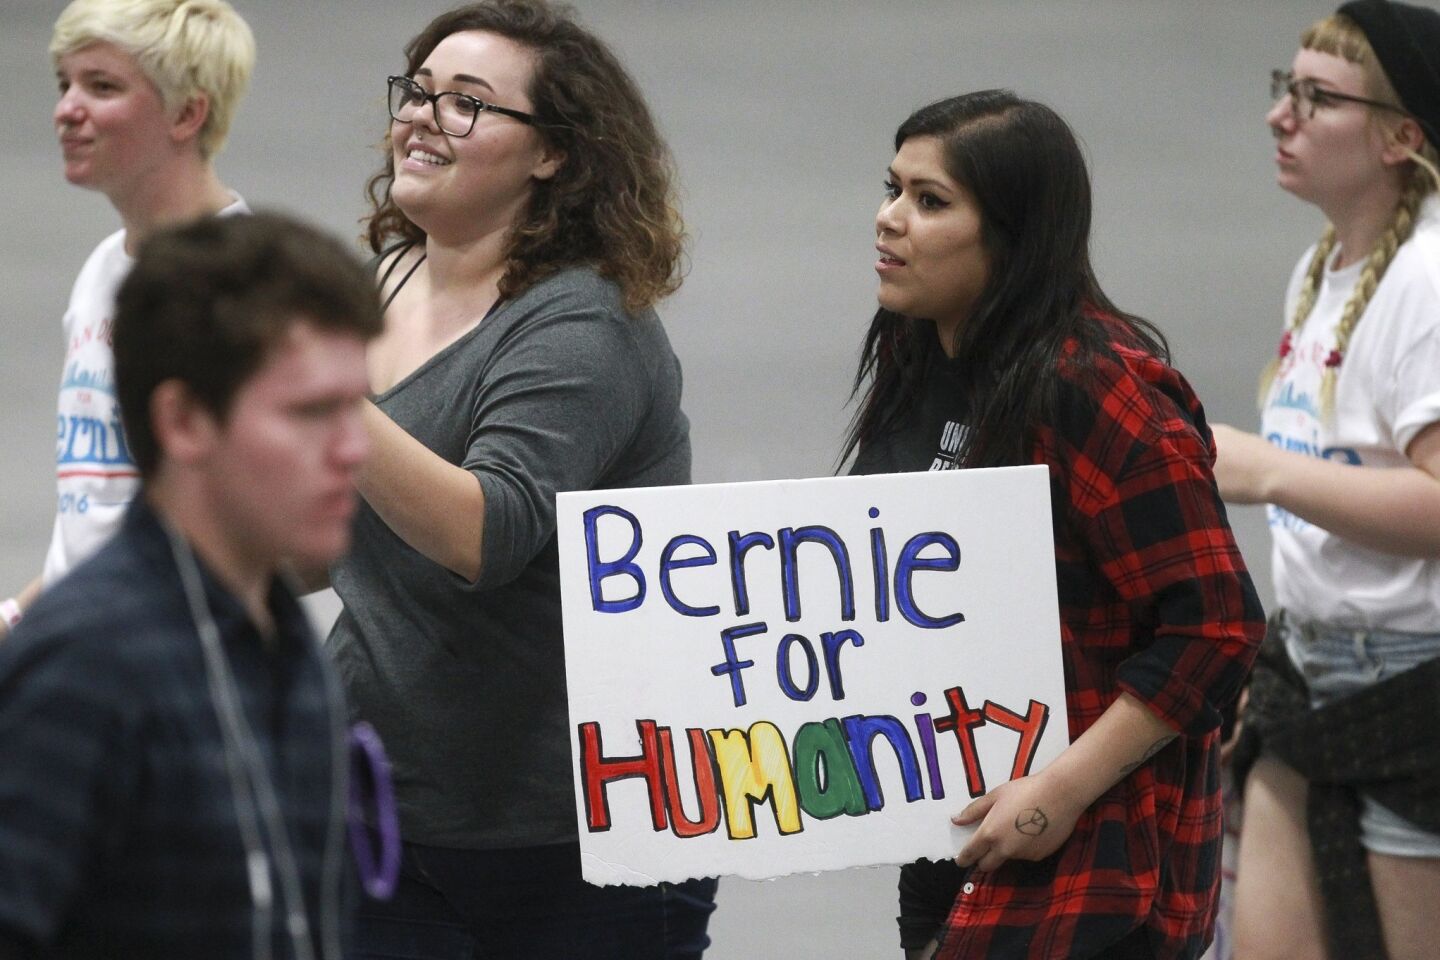 People enter the San Diego Convention Center for Democratic presidential candidate Bernie Sanders.